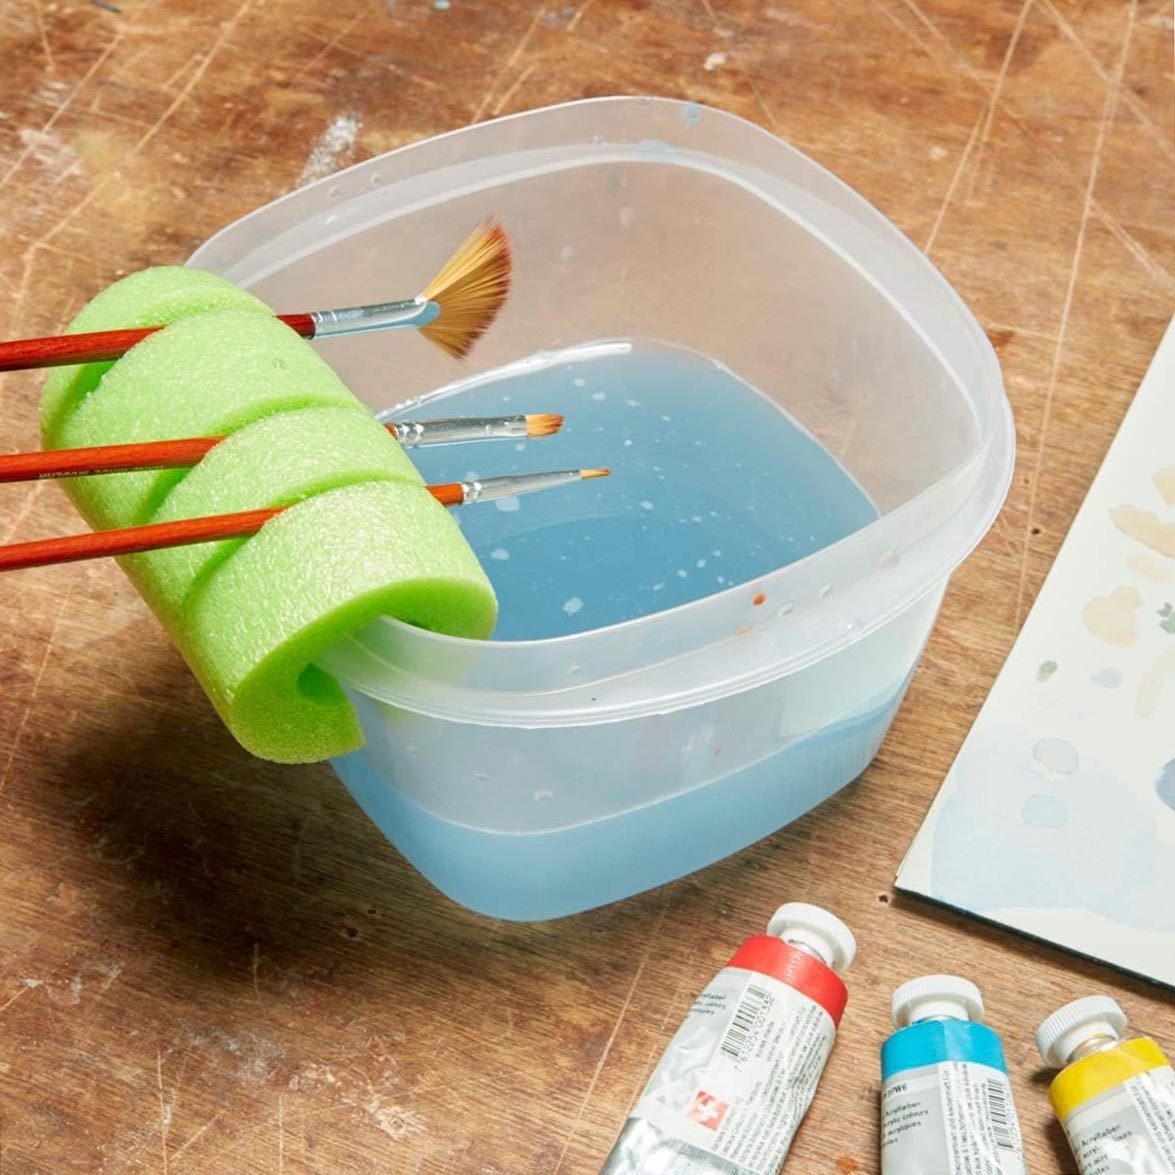 small paint brushes resting in a slits in a green pool noodle that has been placed on the edge of a plastic container that holds paint rinse water